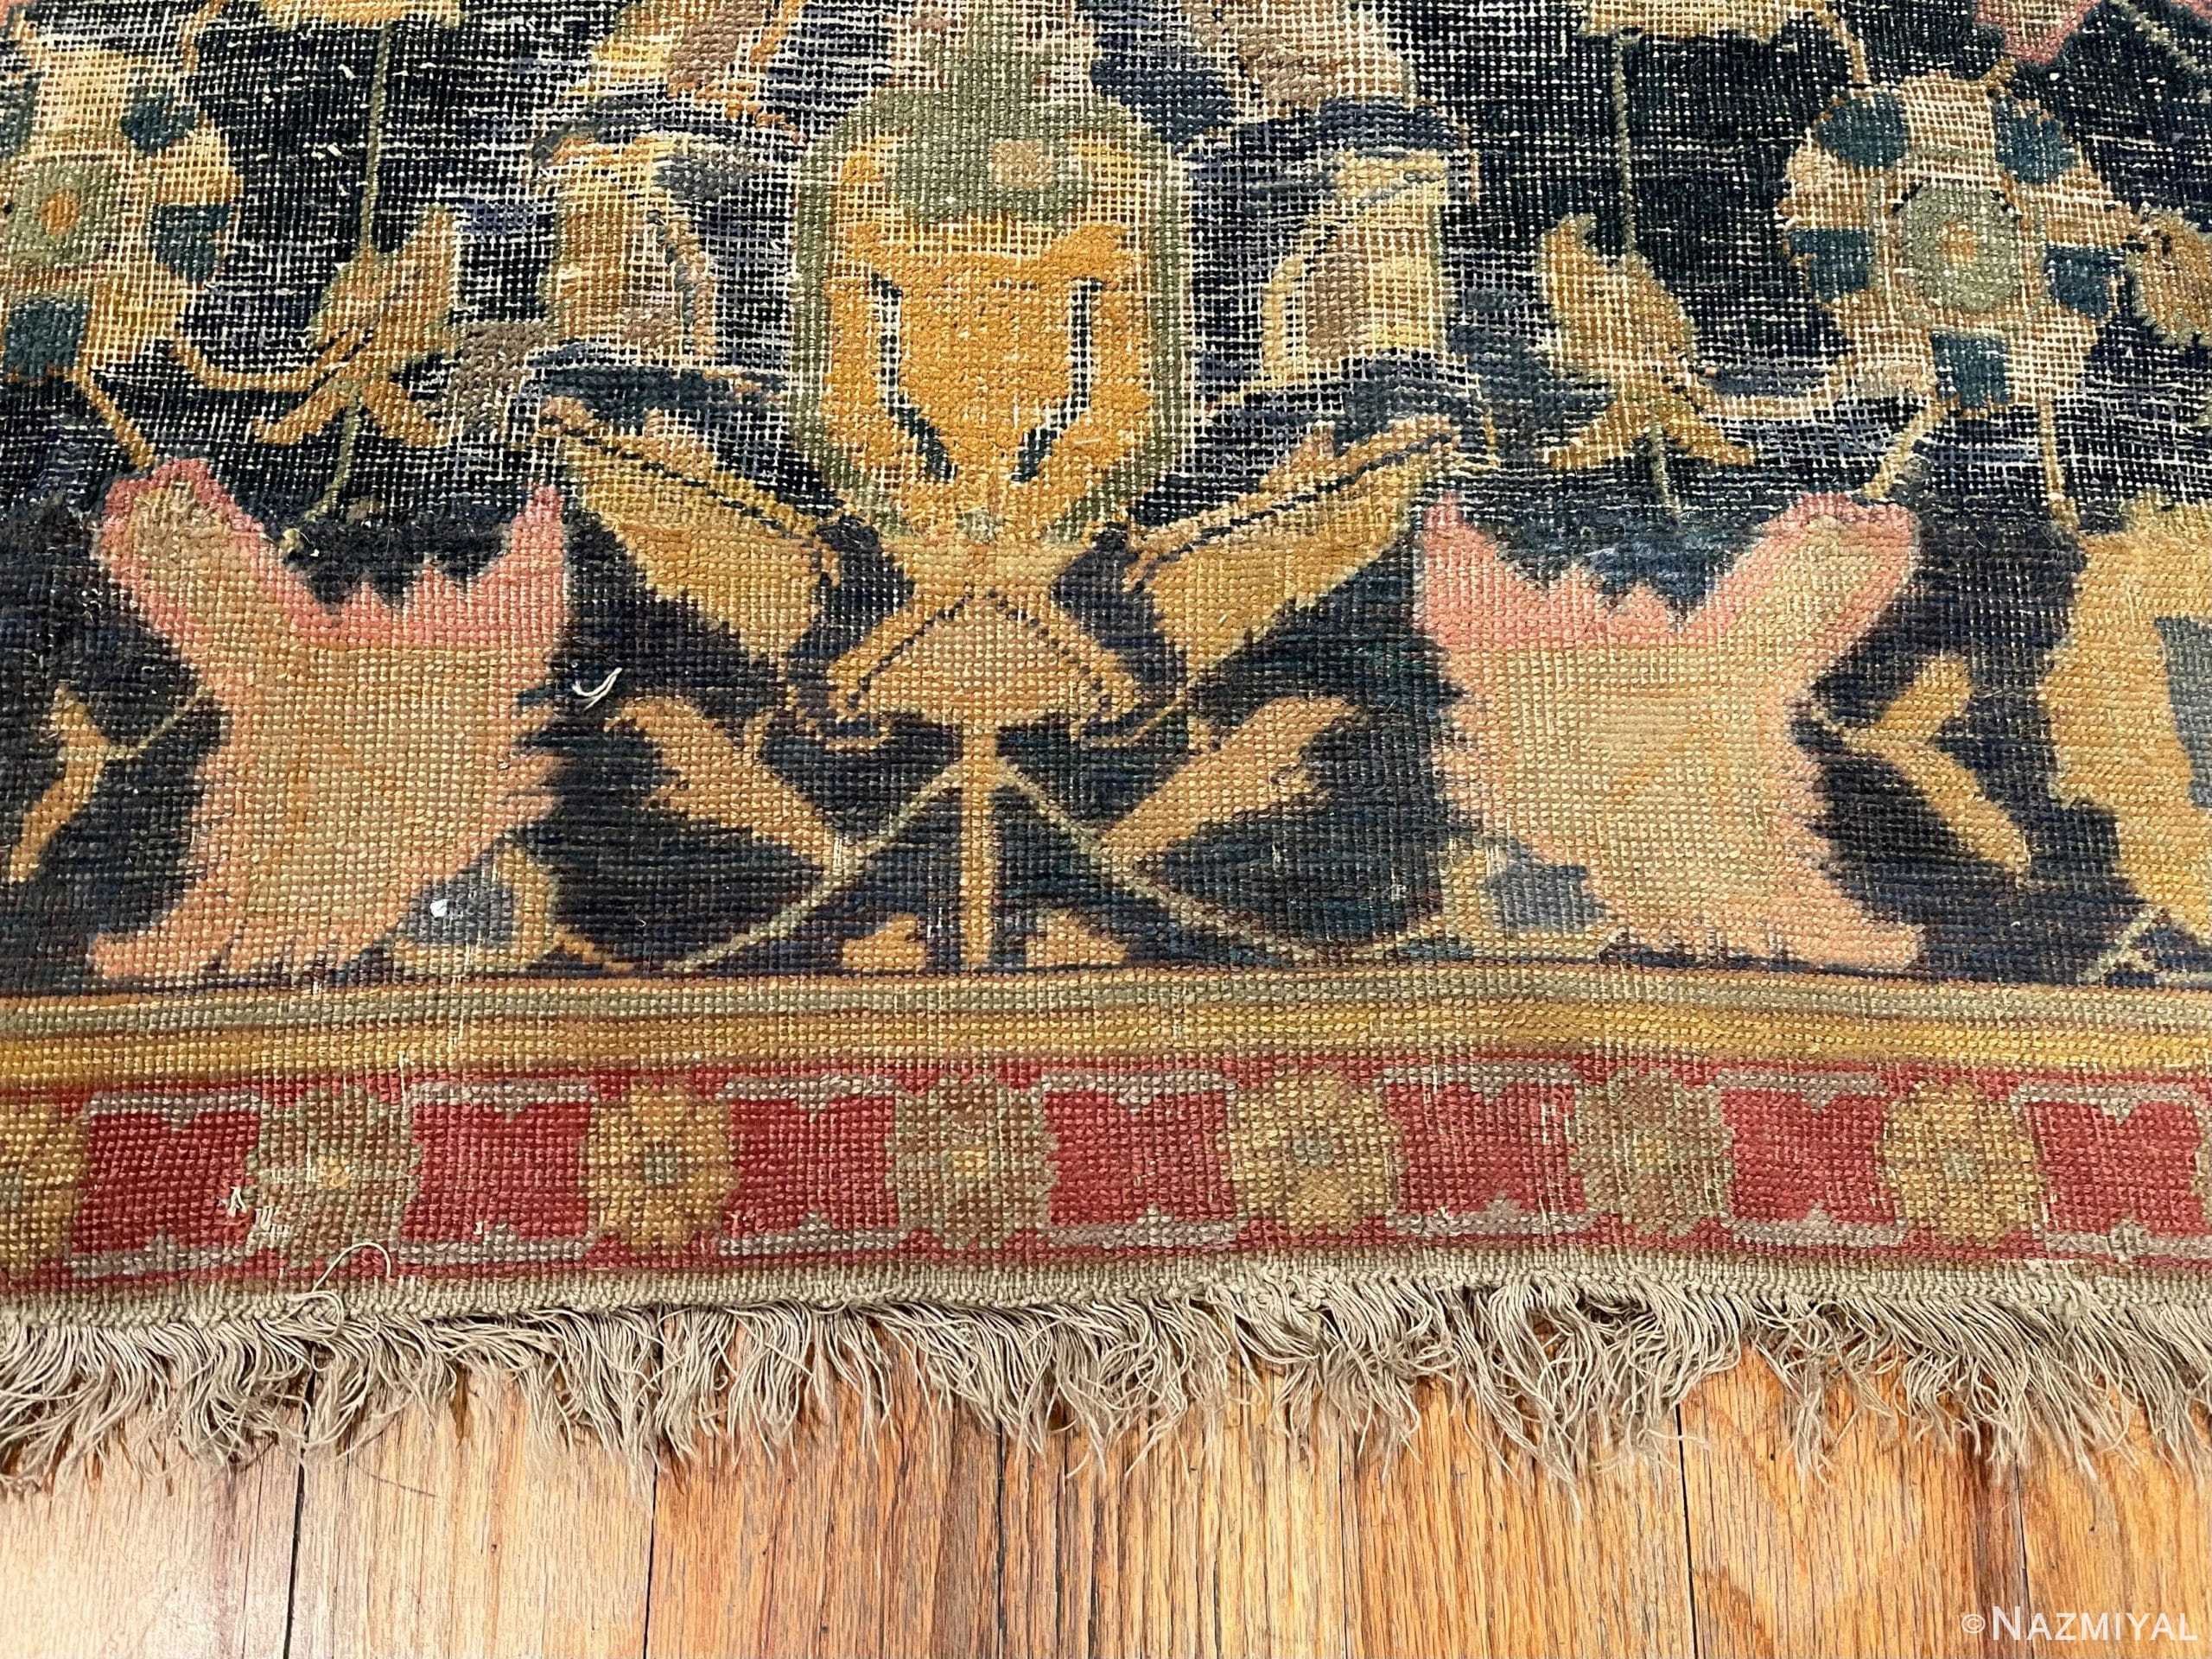 Border Of Rare 17th Century Large Antique Persian Isfahan Rug 70804 by Nazmiyal Antique Rugs